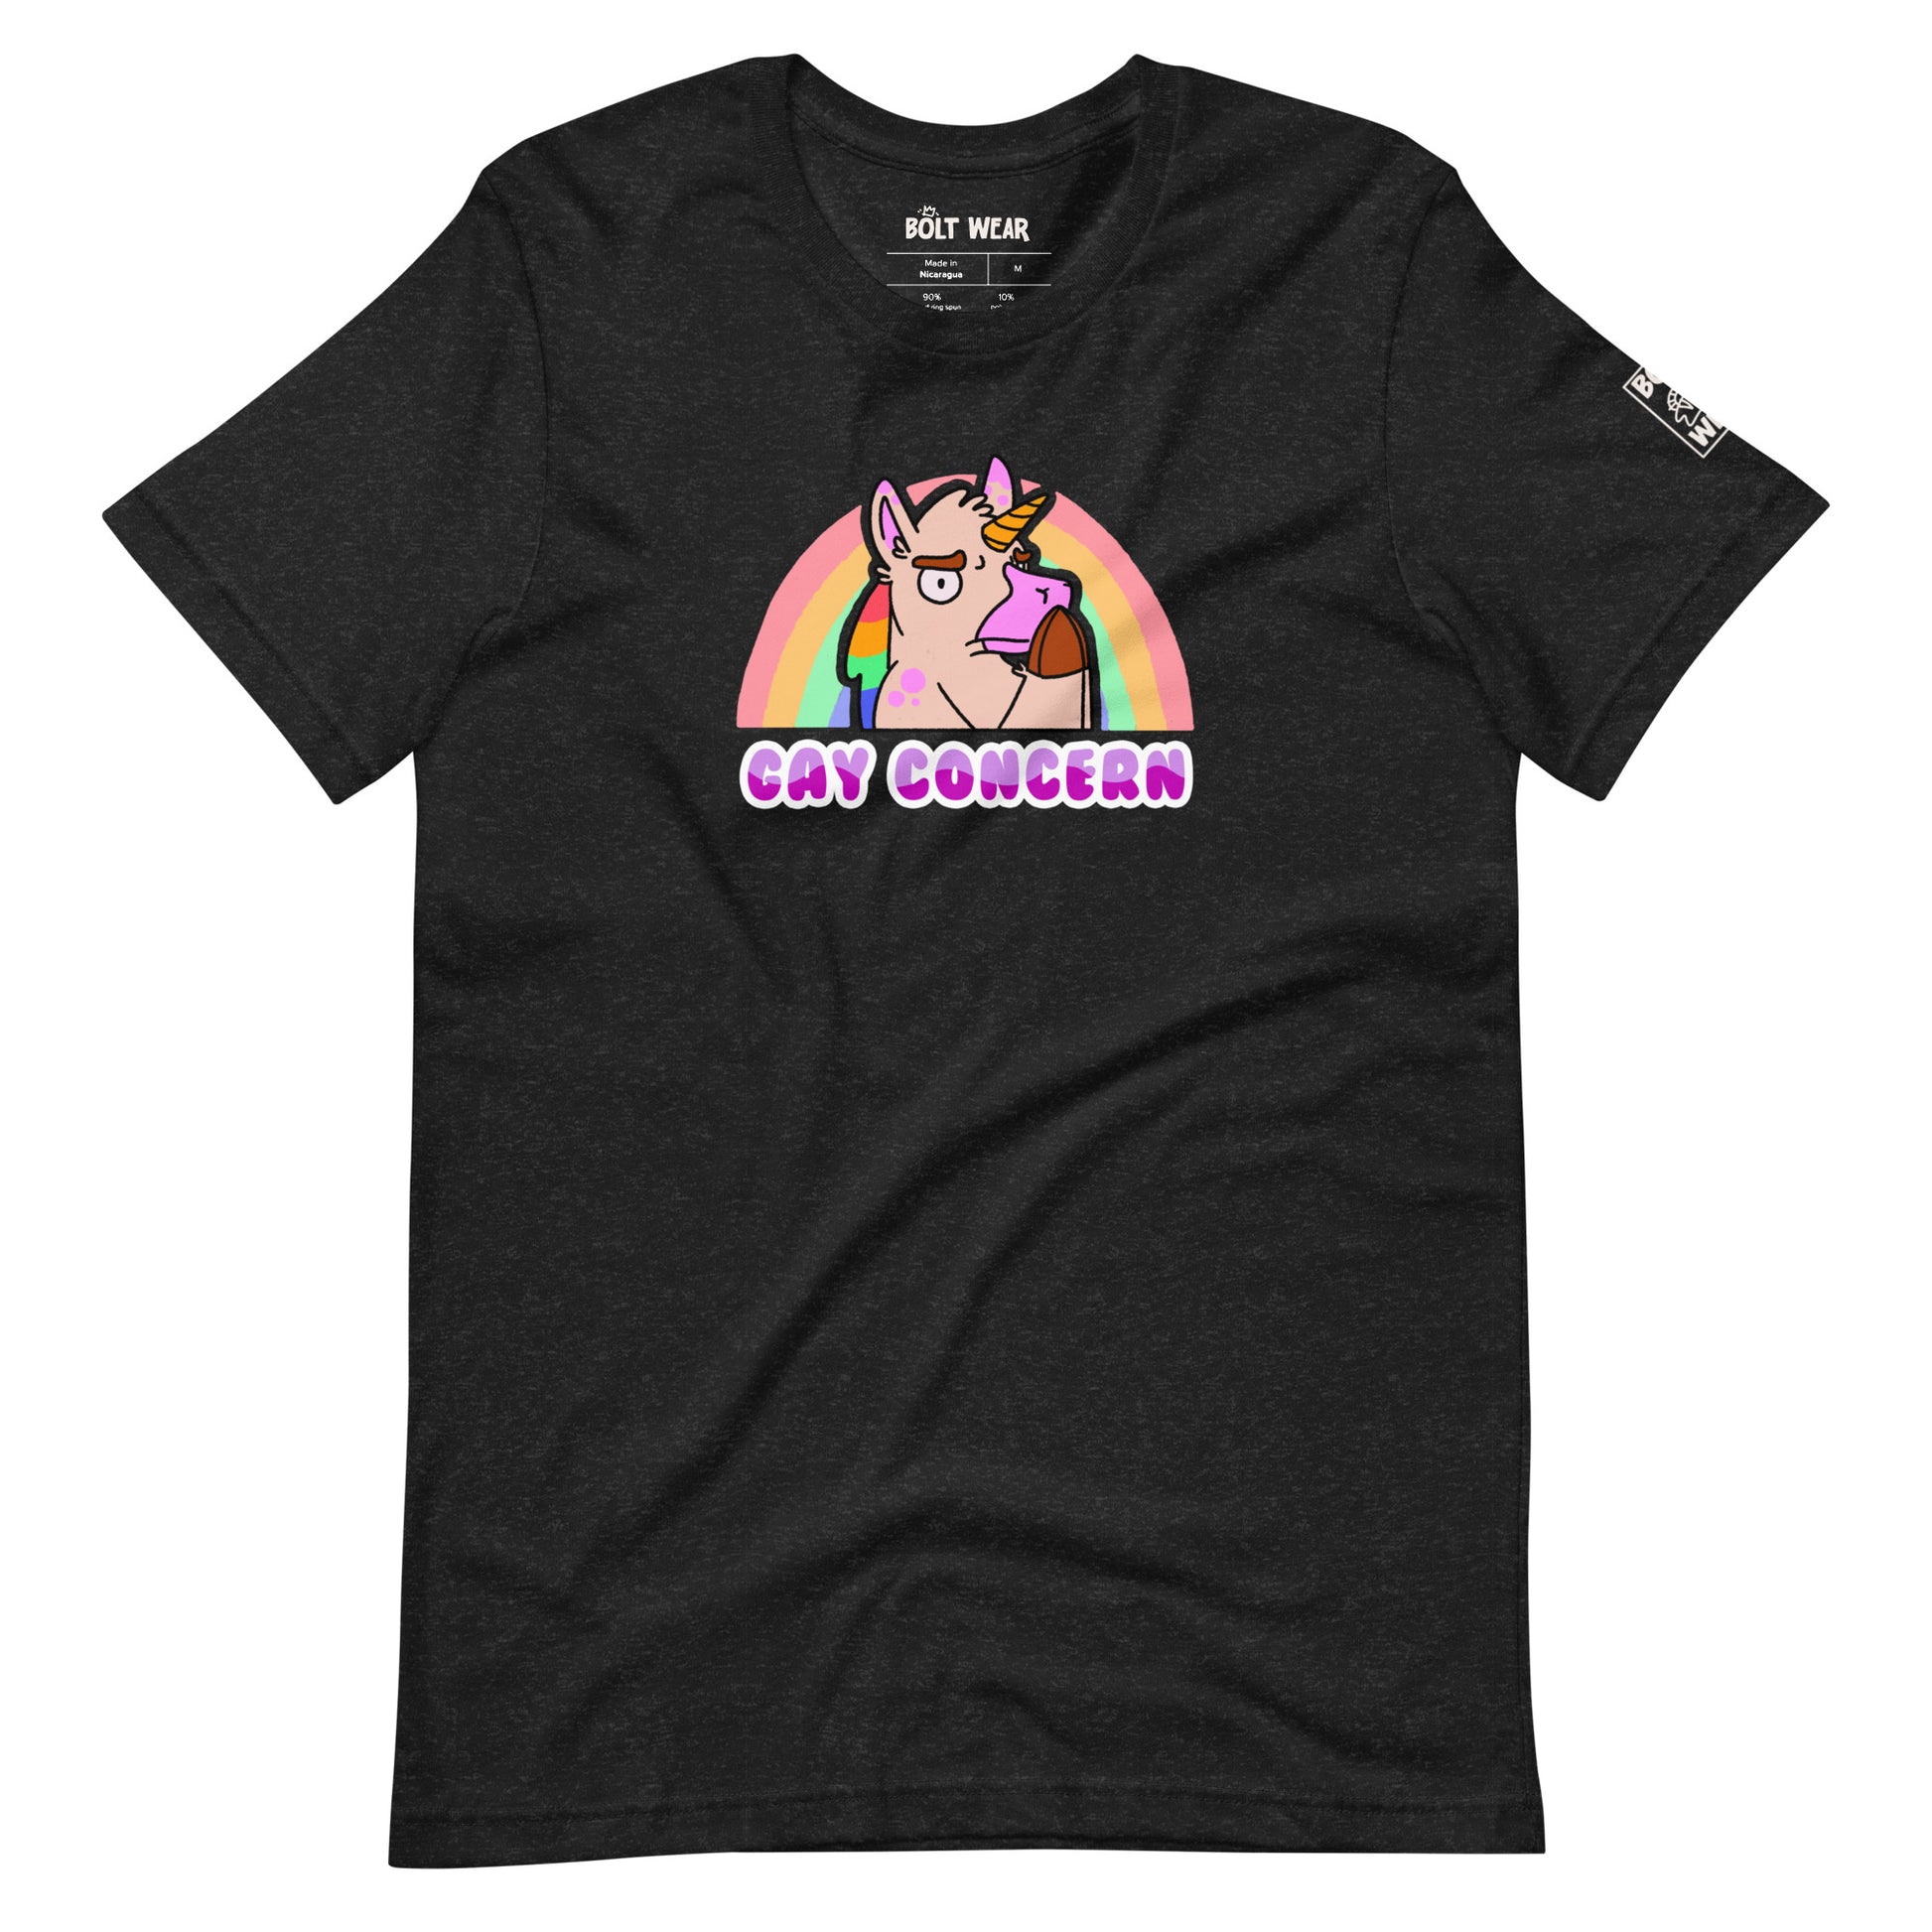 Black heather Gay Concern t-shirt featuring unicorn in concerned pose with rainbow behind.